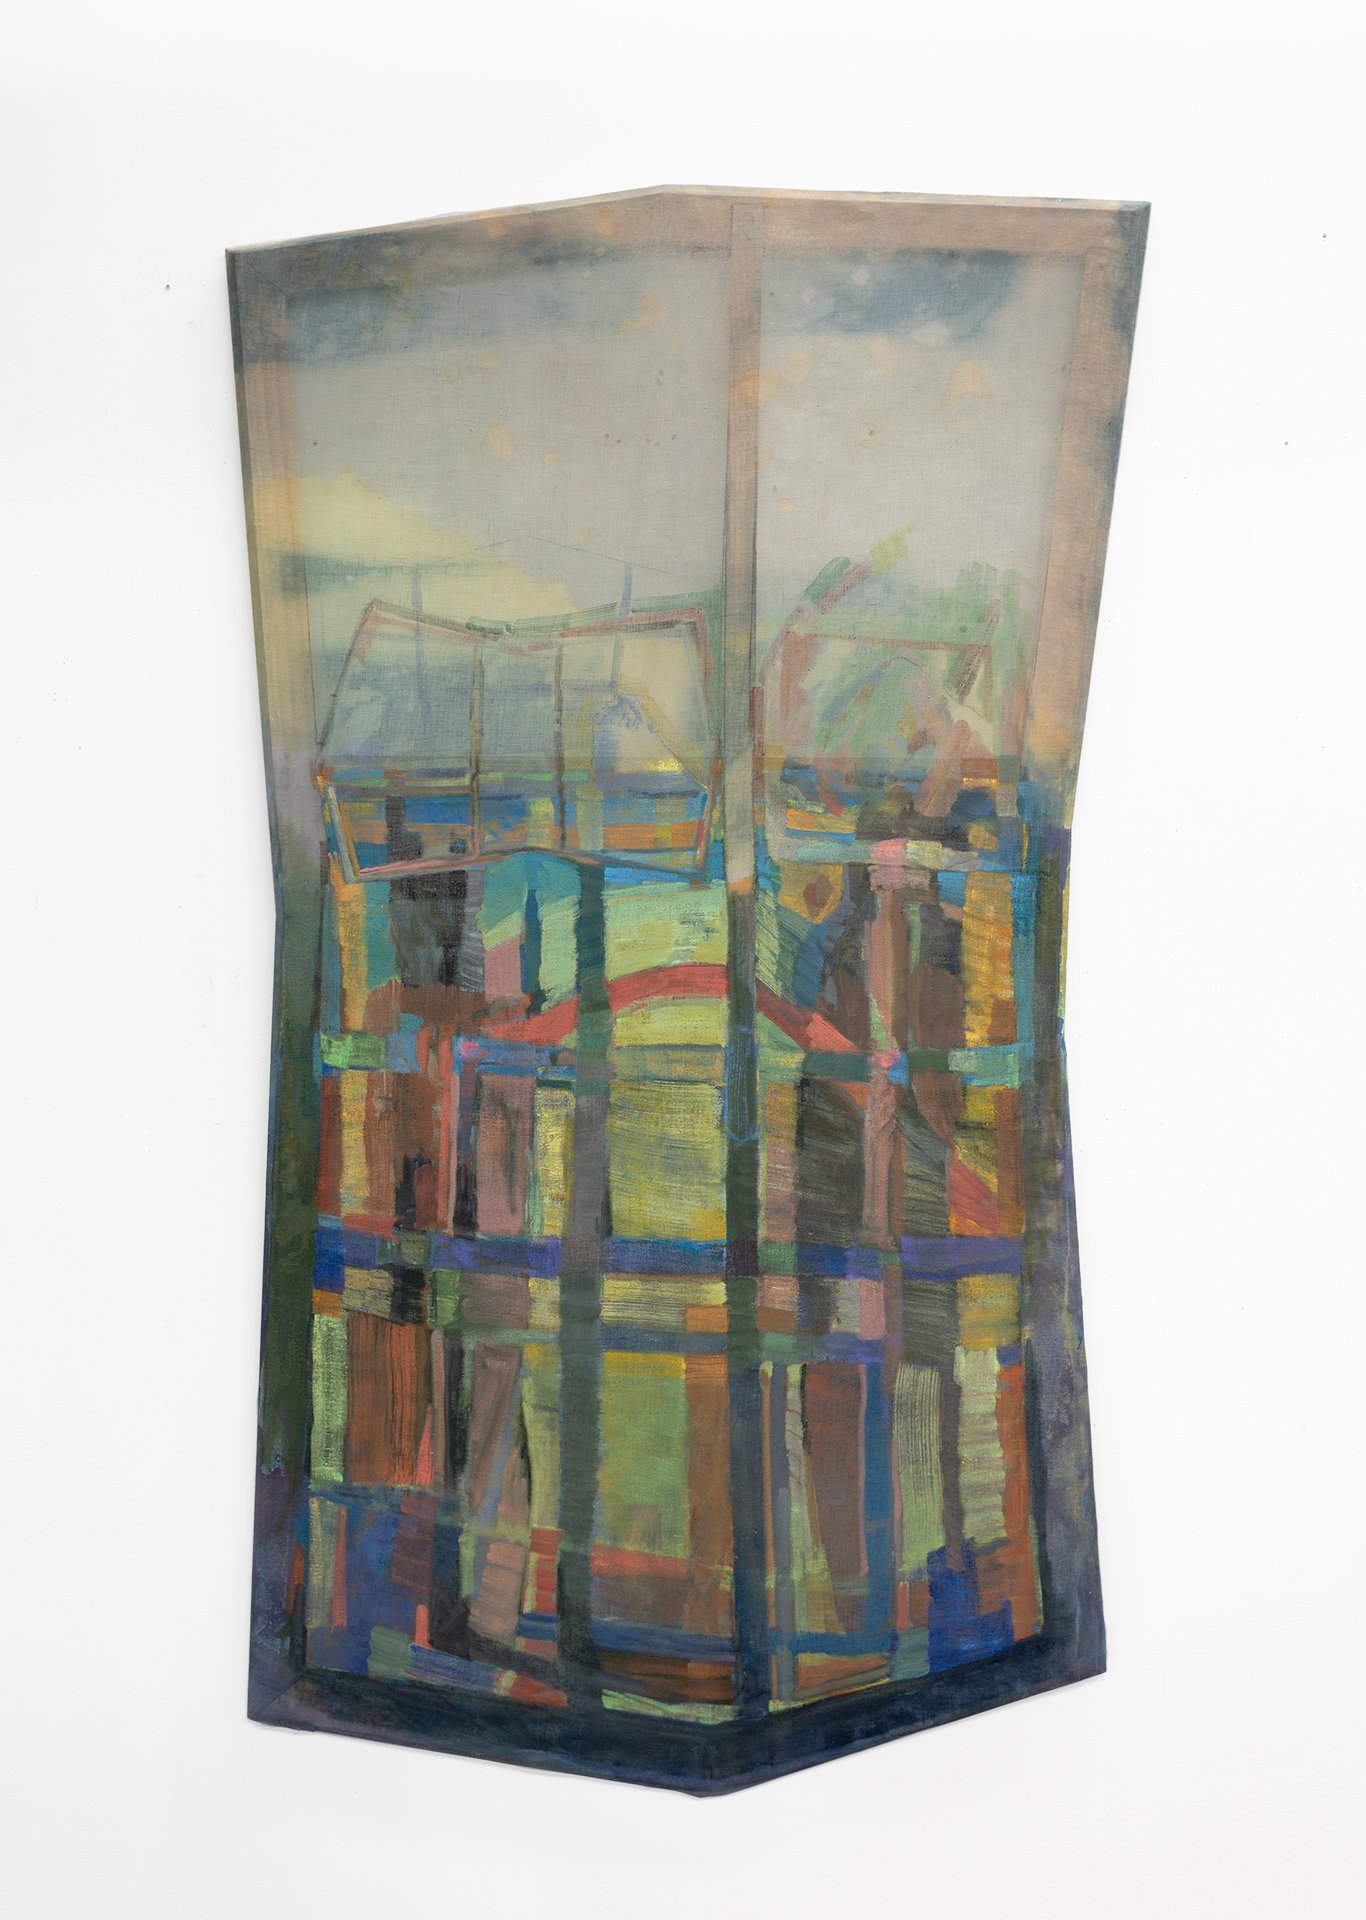  Home and Away, 2023. Dye, bleach, oil, acrylic, and graphite on beveled and bowed pine. 70 x 35 x 5 inches. The edges of this shaped painting are beveled at 45 degrees, and the painting dimensionally bows on a built wooden structure that is visible 